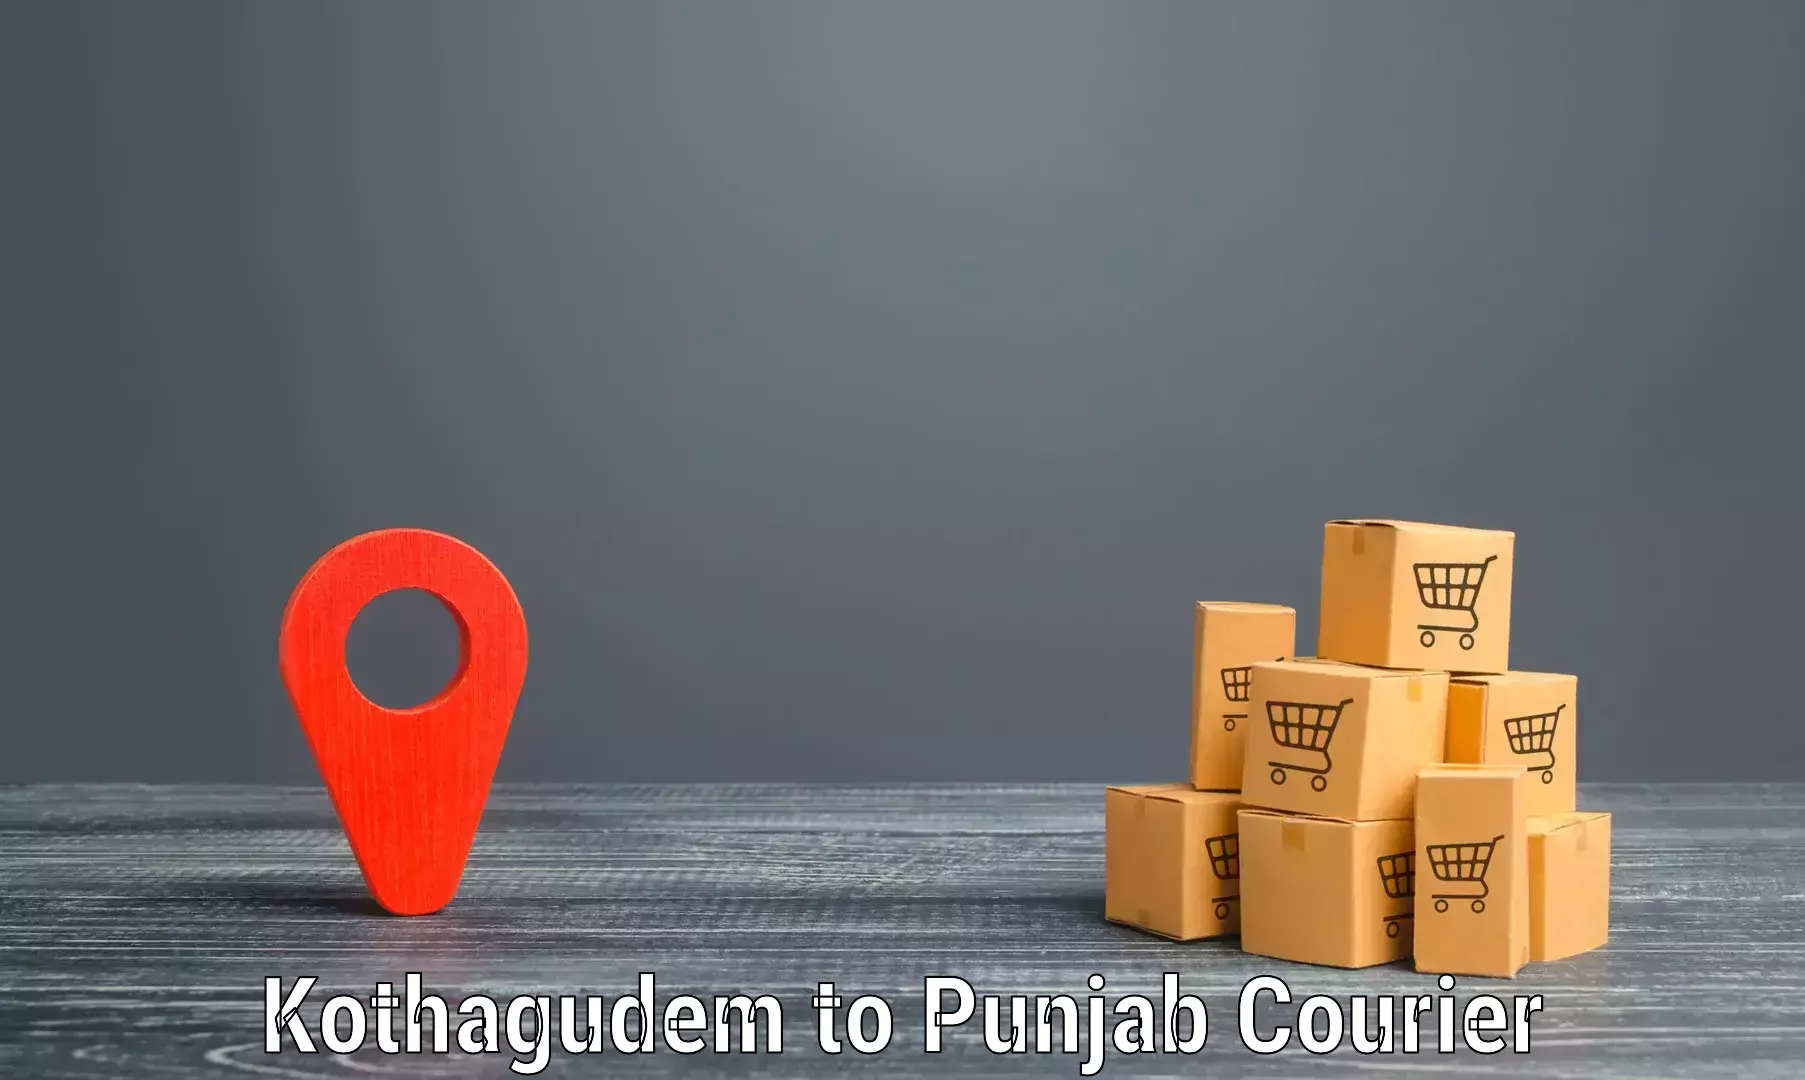 Easy access courier services Kothagudem to Punjab